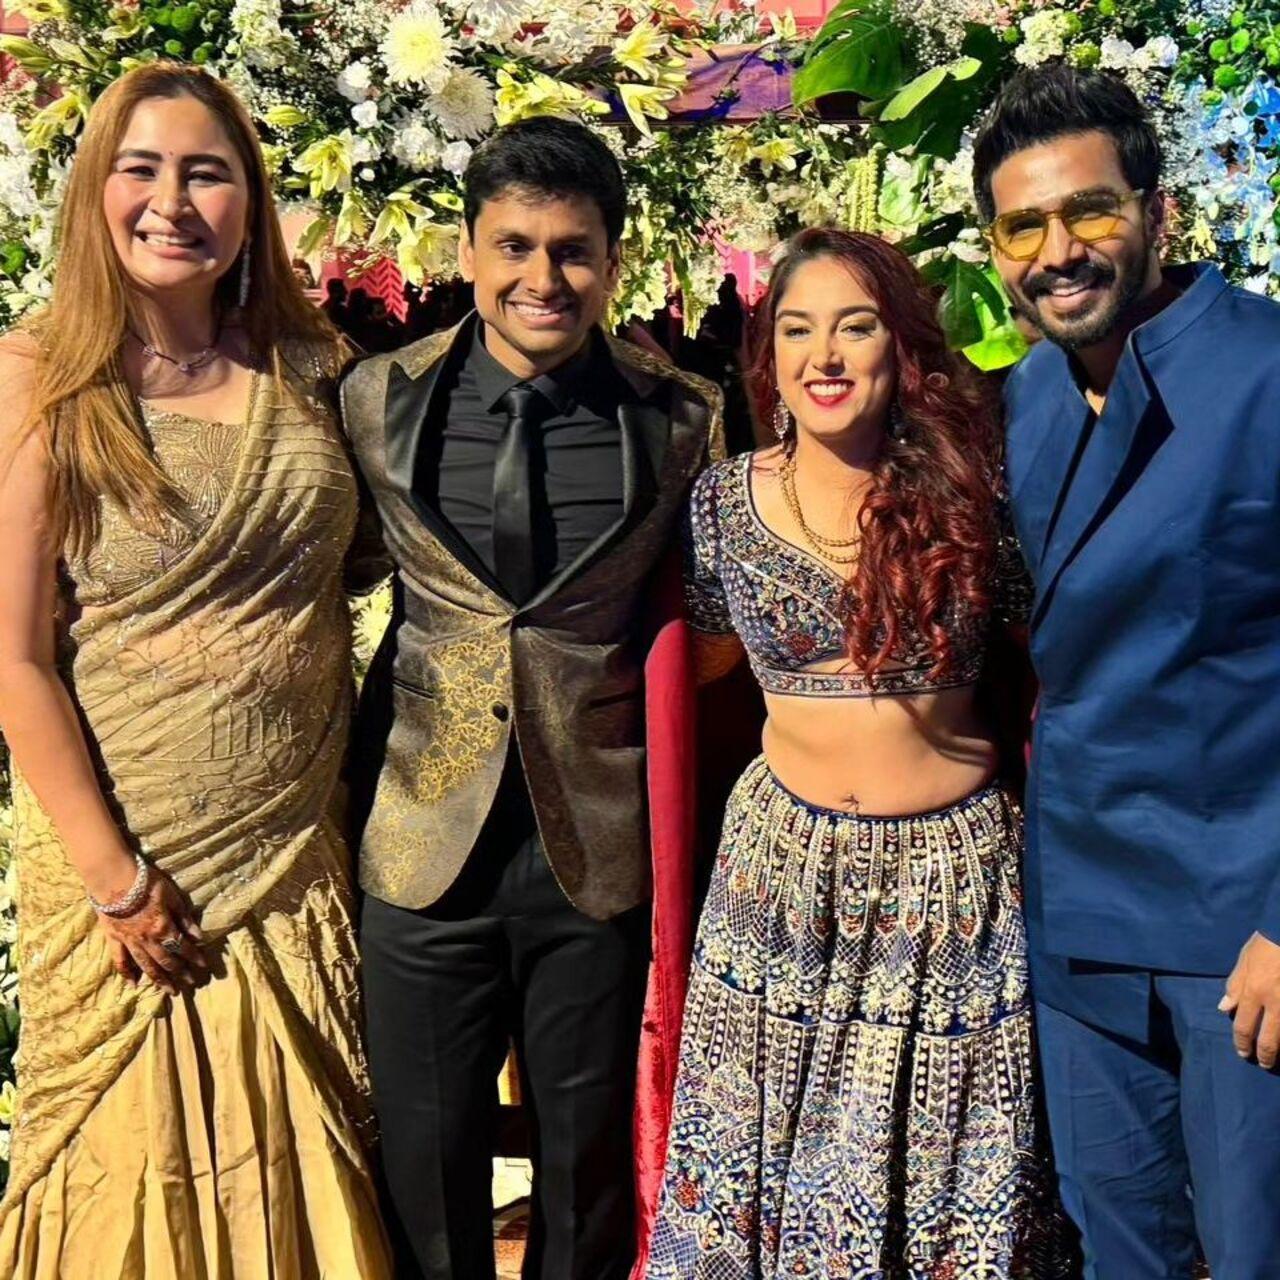 Actor Vishnu Vishal and badminton player Jwala Gutta also attended the wedding. The couple shared a picture with the newlyweds on social media